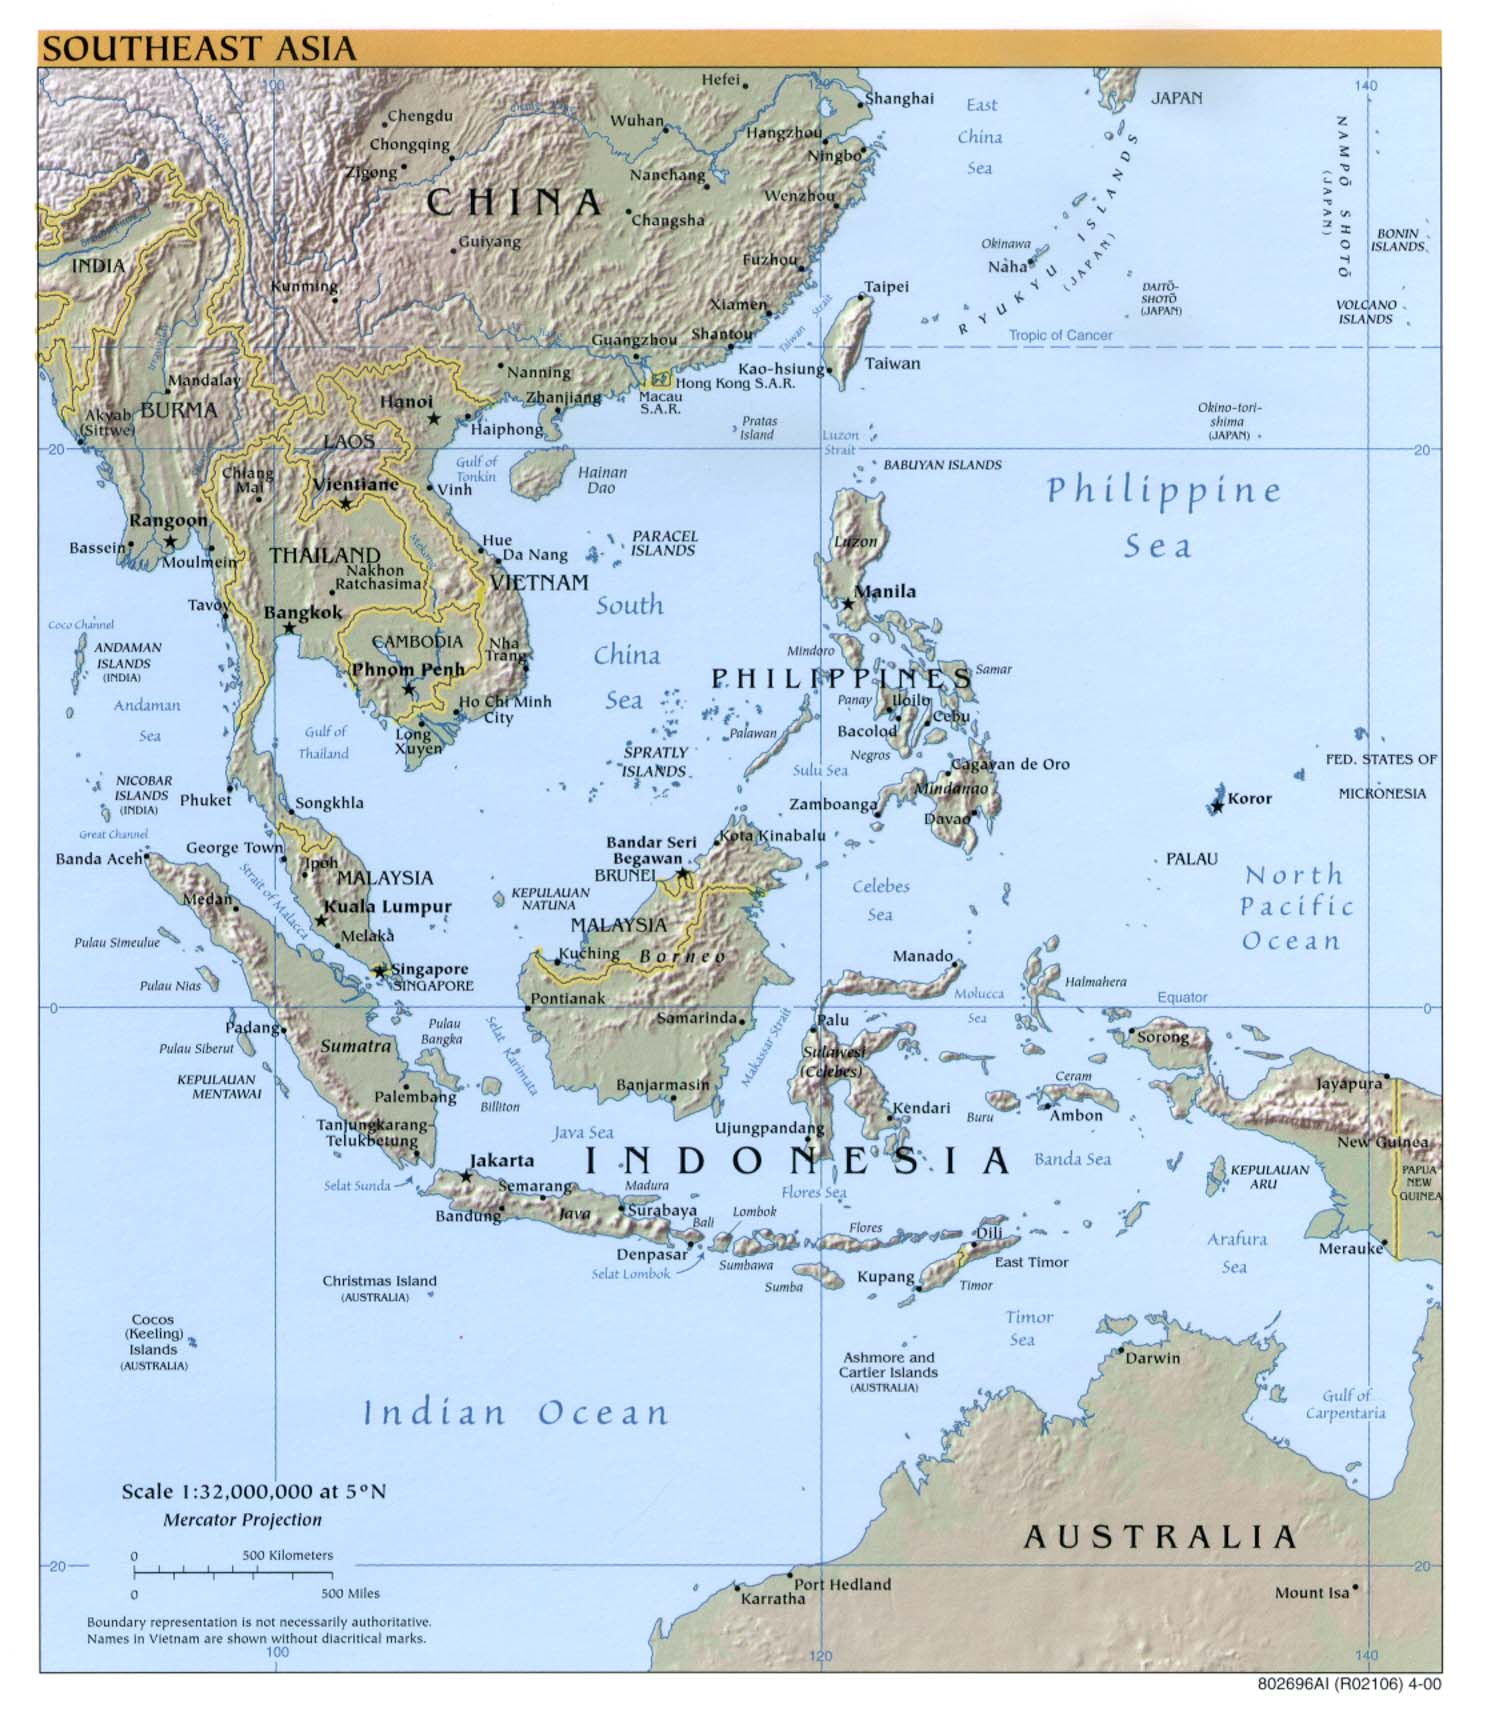 Us geography the southeast asia